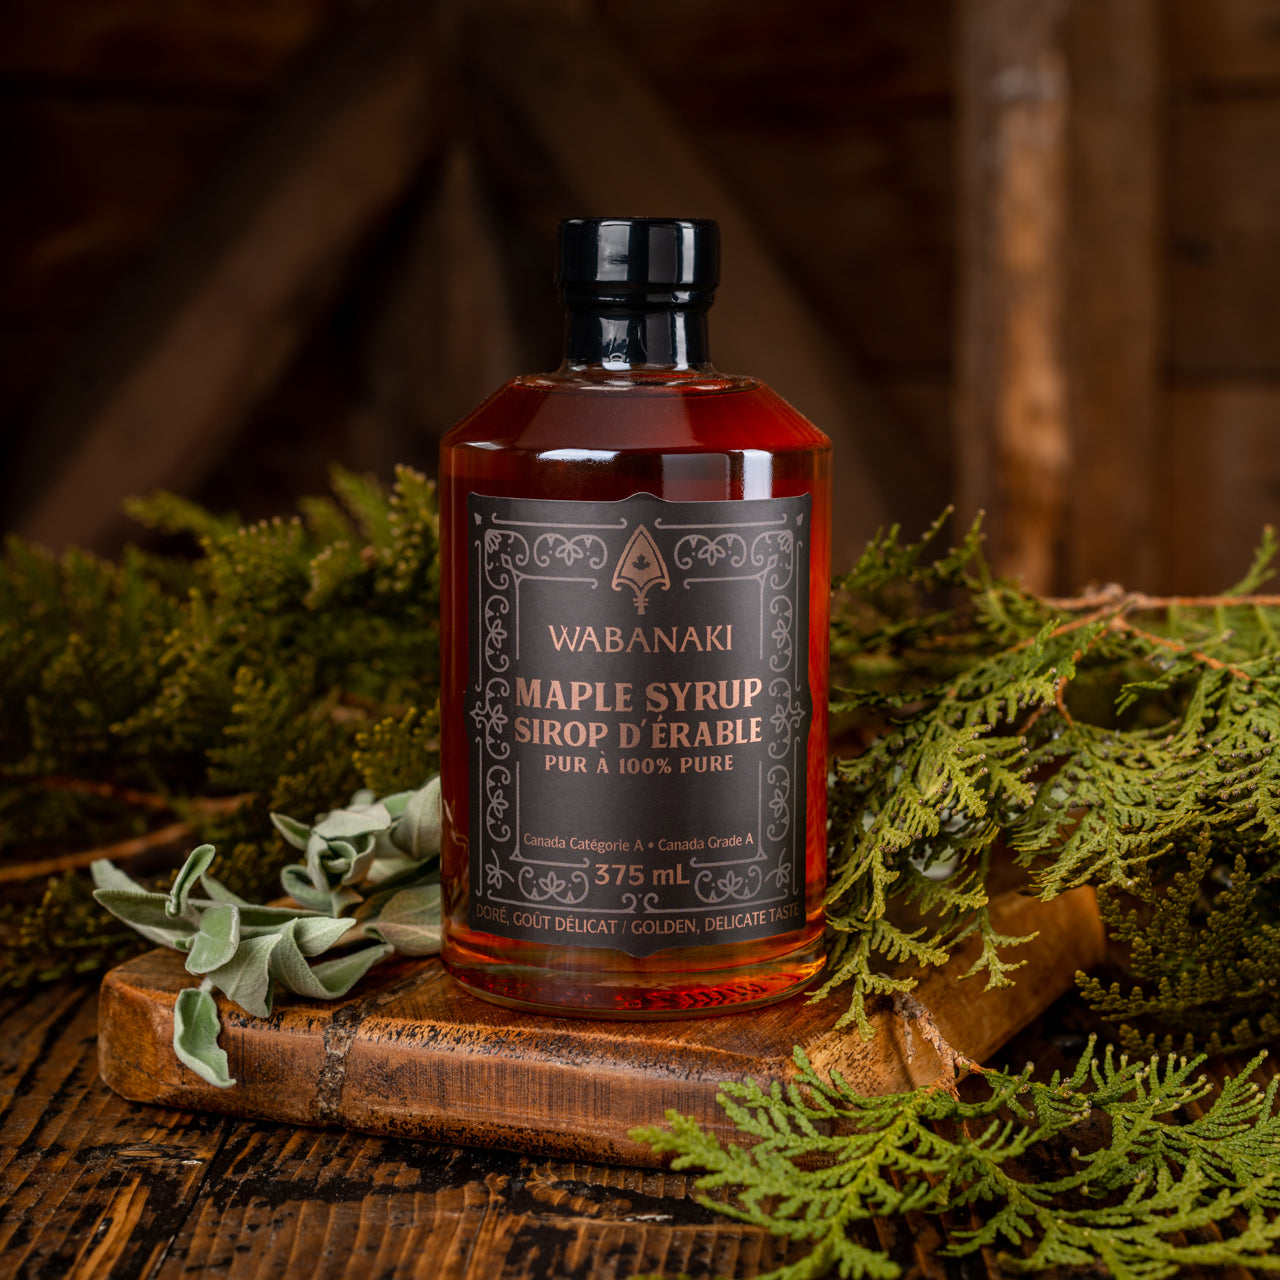 Our Wabanaki Maple is 100% Indigenous, female, grade A, Golden maple syrup that provides the perfect balance of delicacy and sweetness